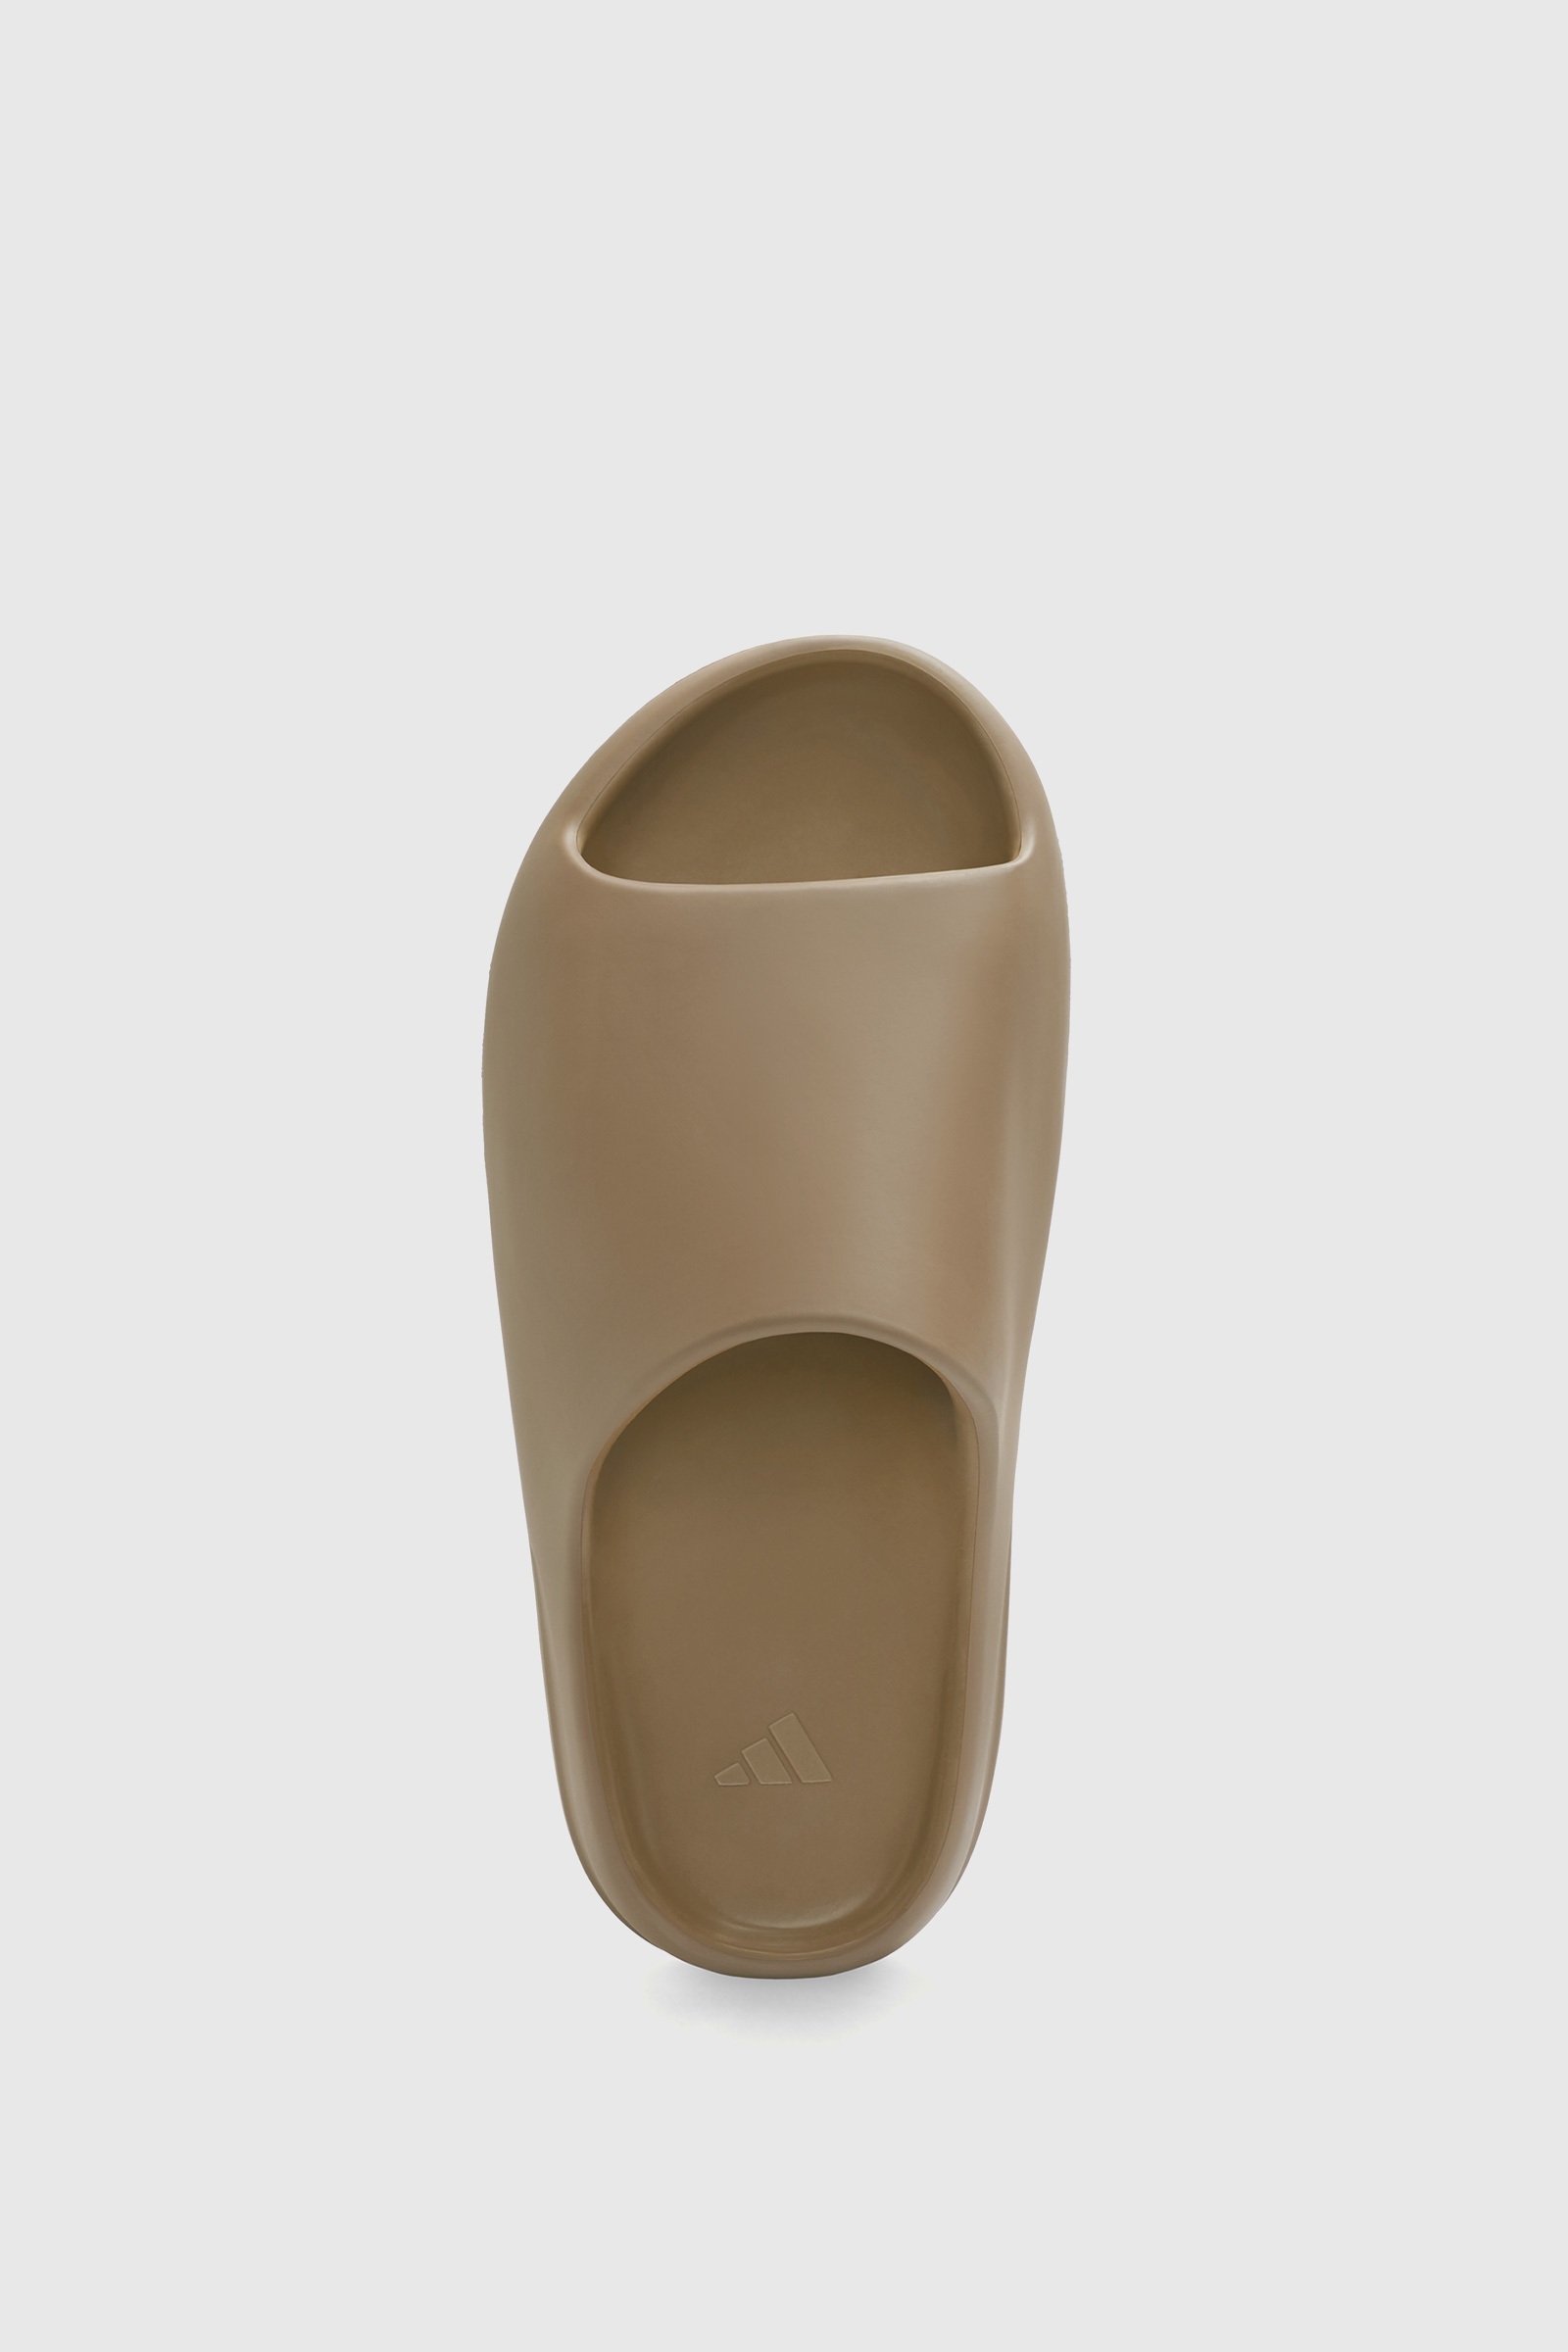 where to purchase yeezy slides